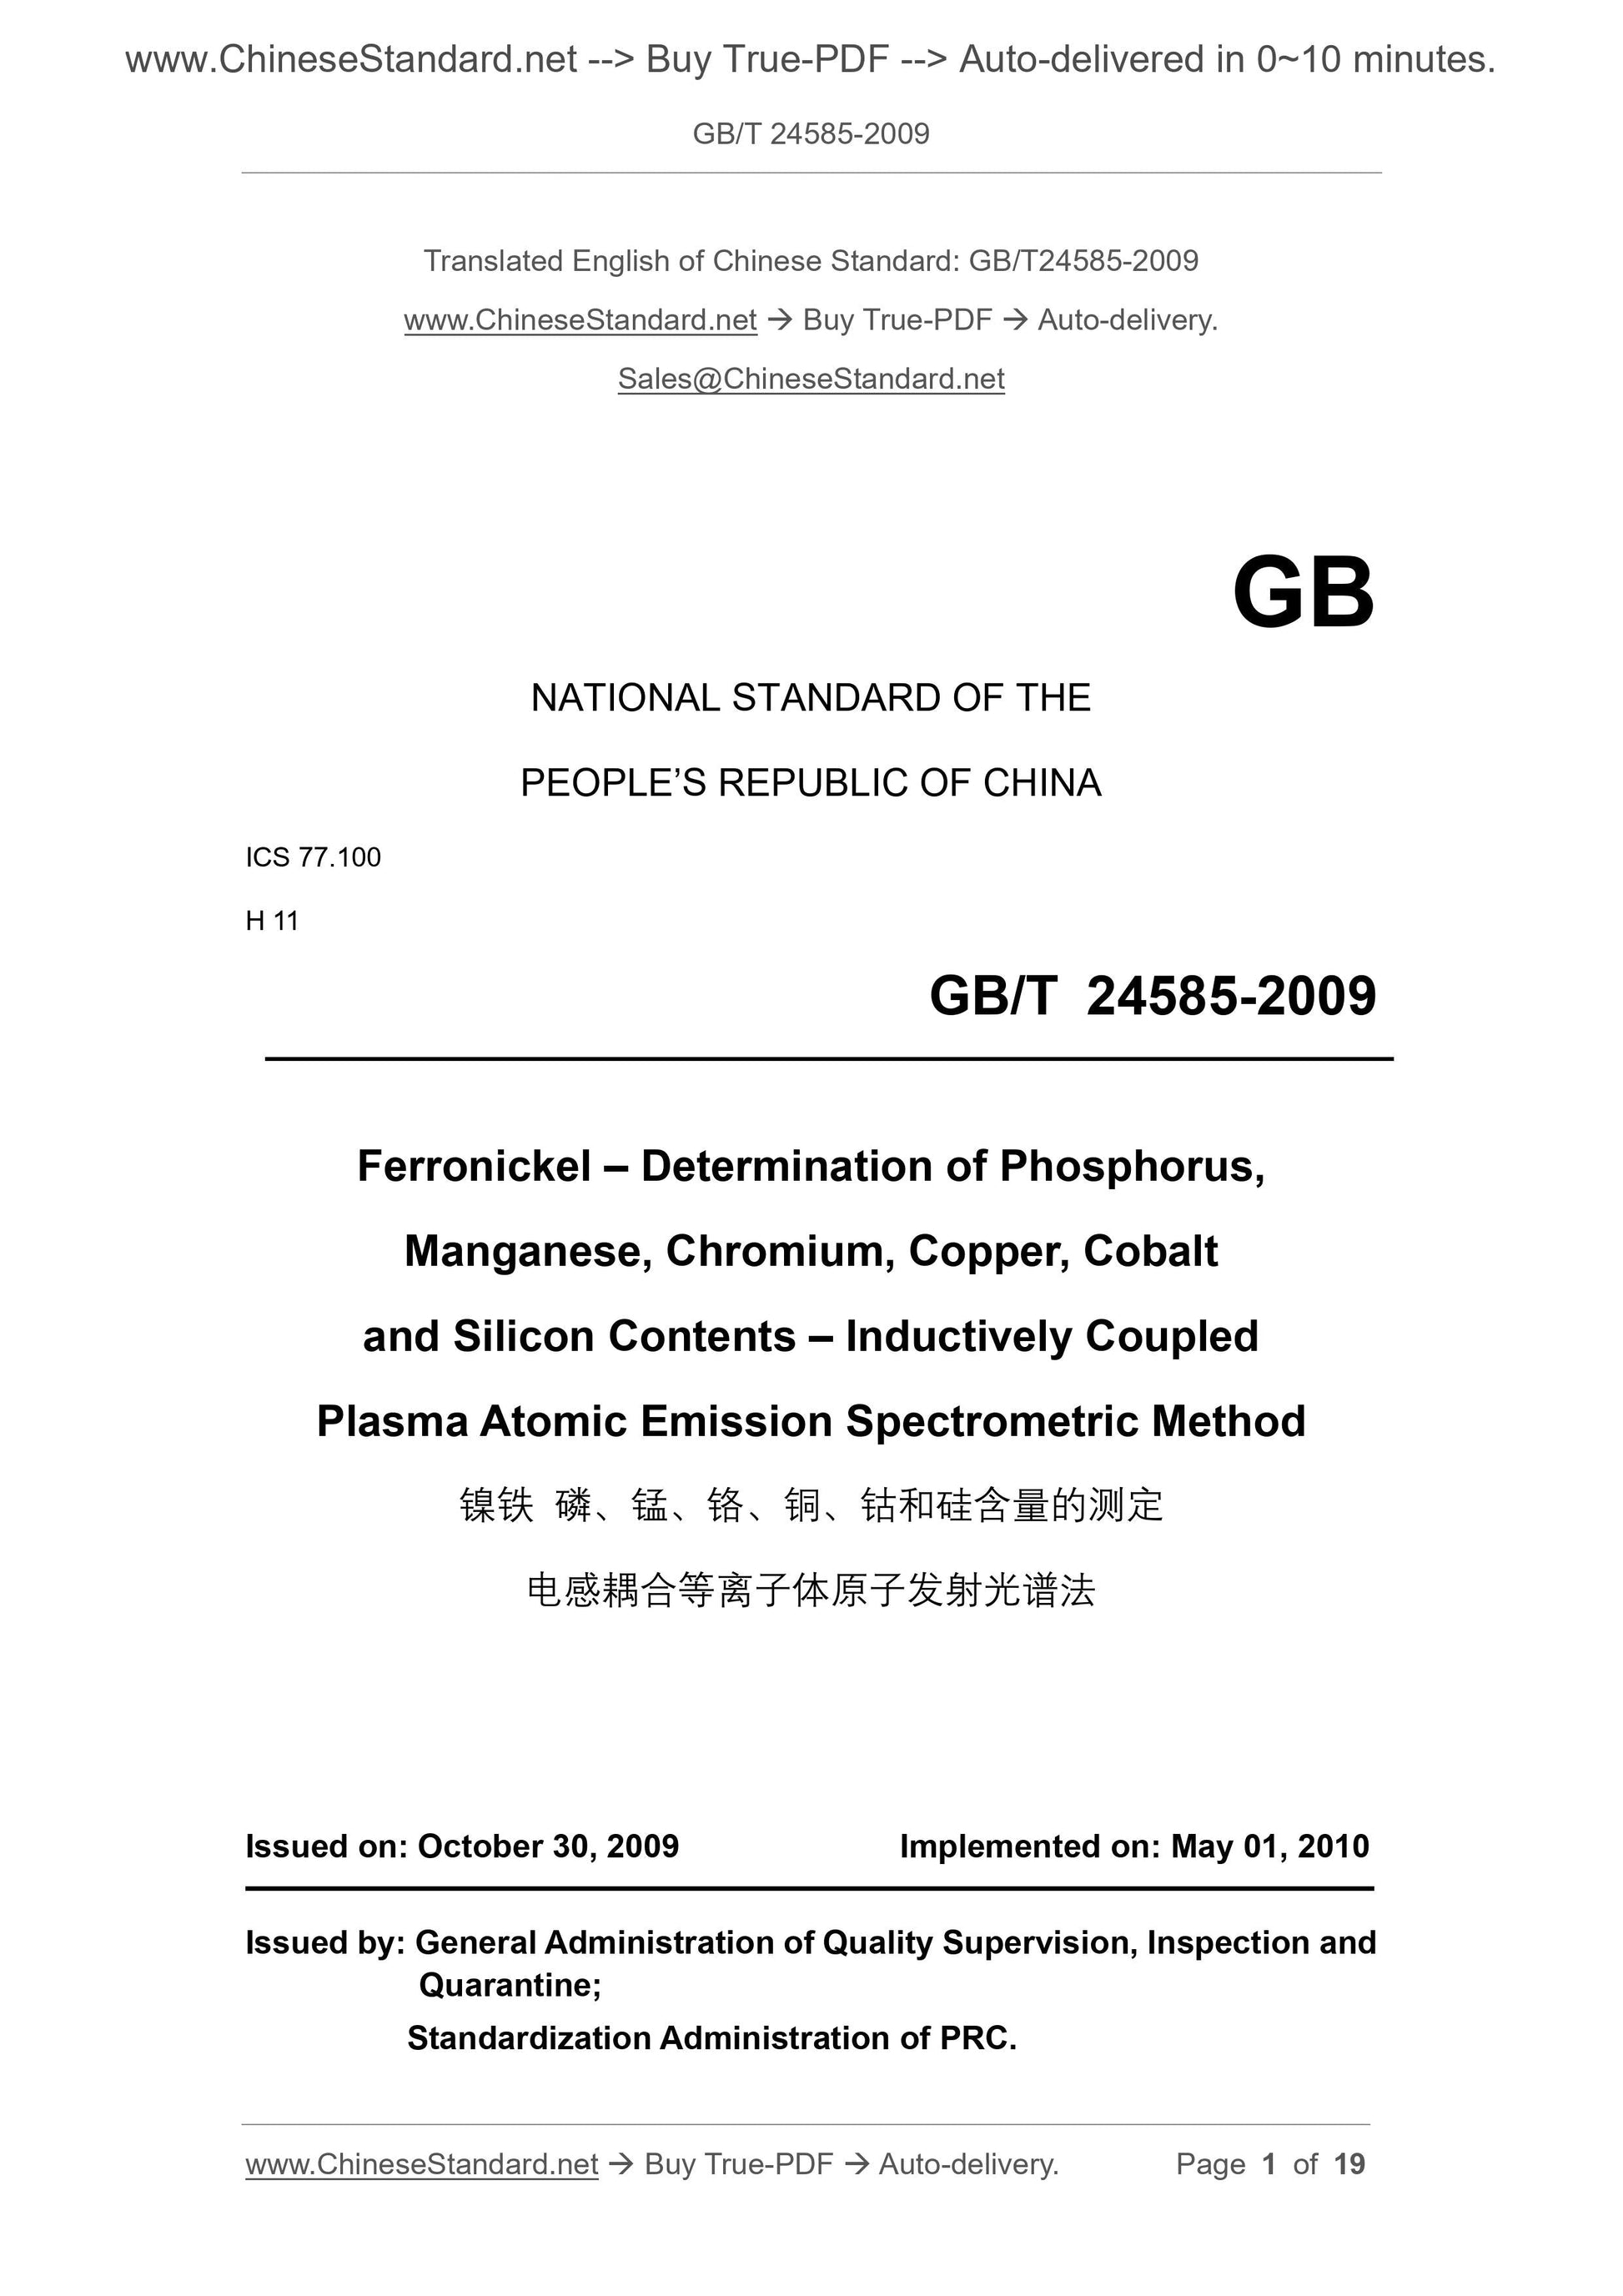 GB/T 24585-2009 Page 1